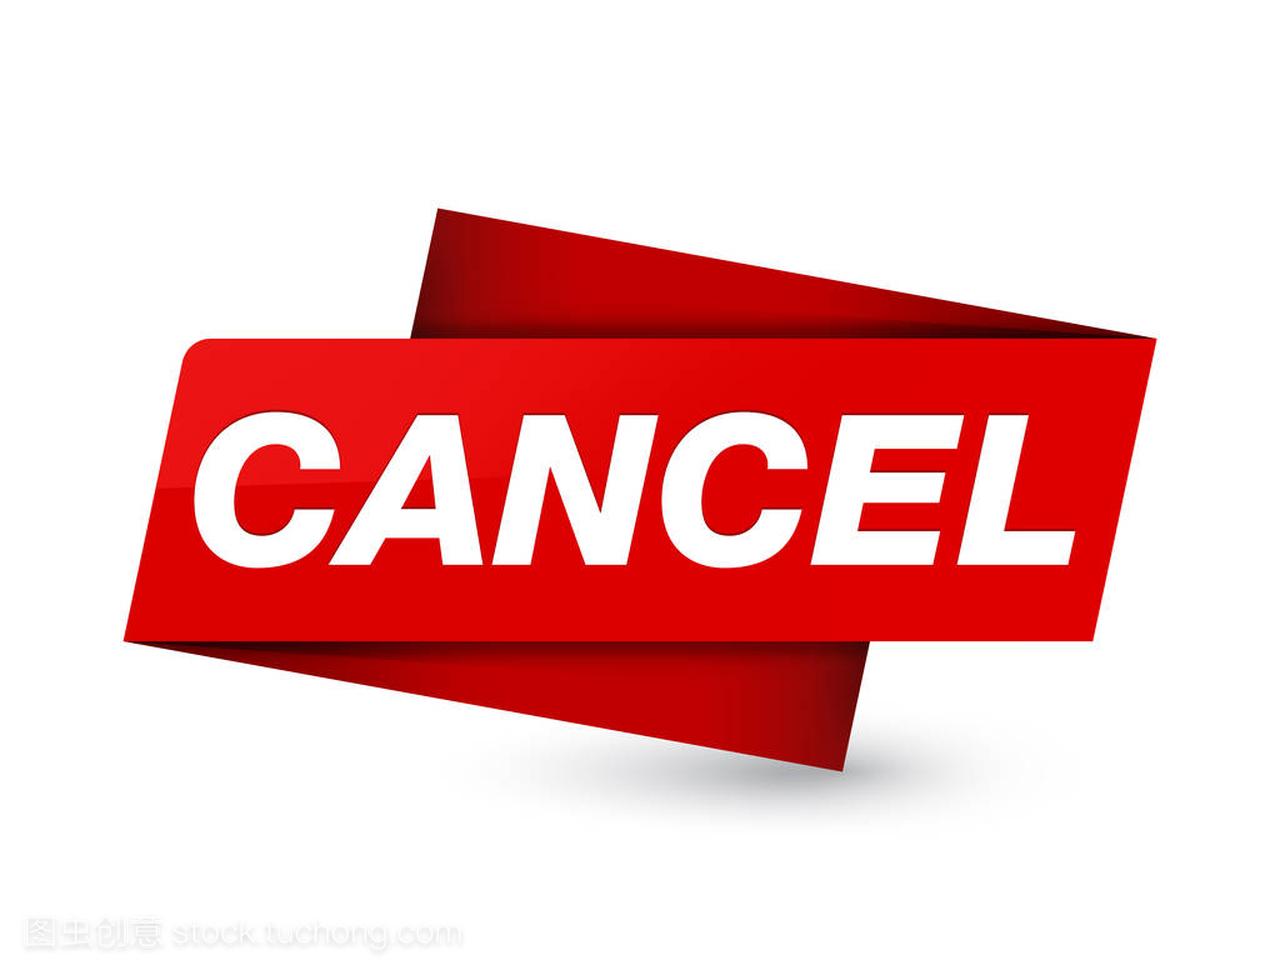 Cancel isolated on premium red tag sign abstract illustration